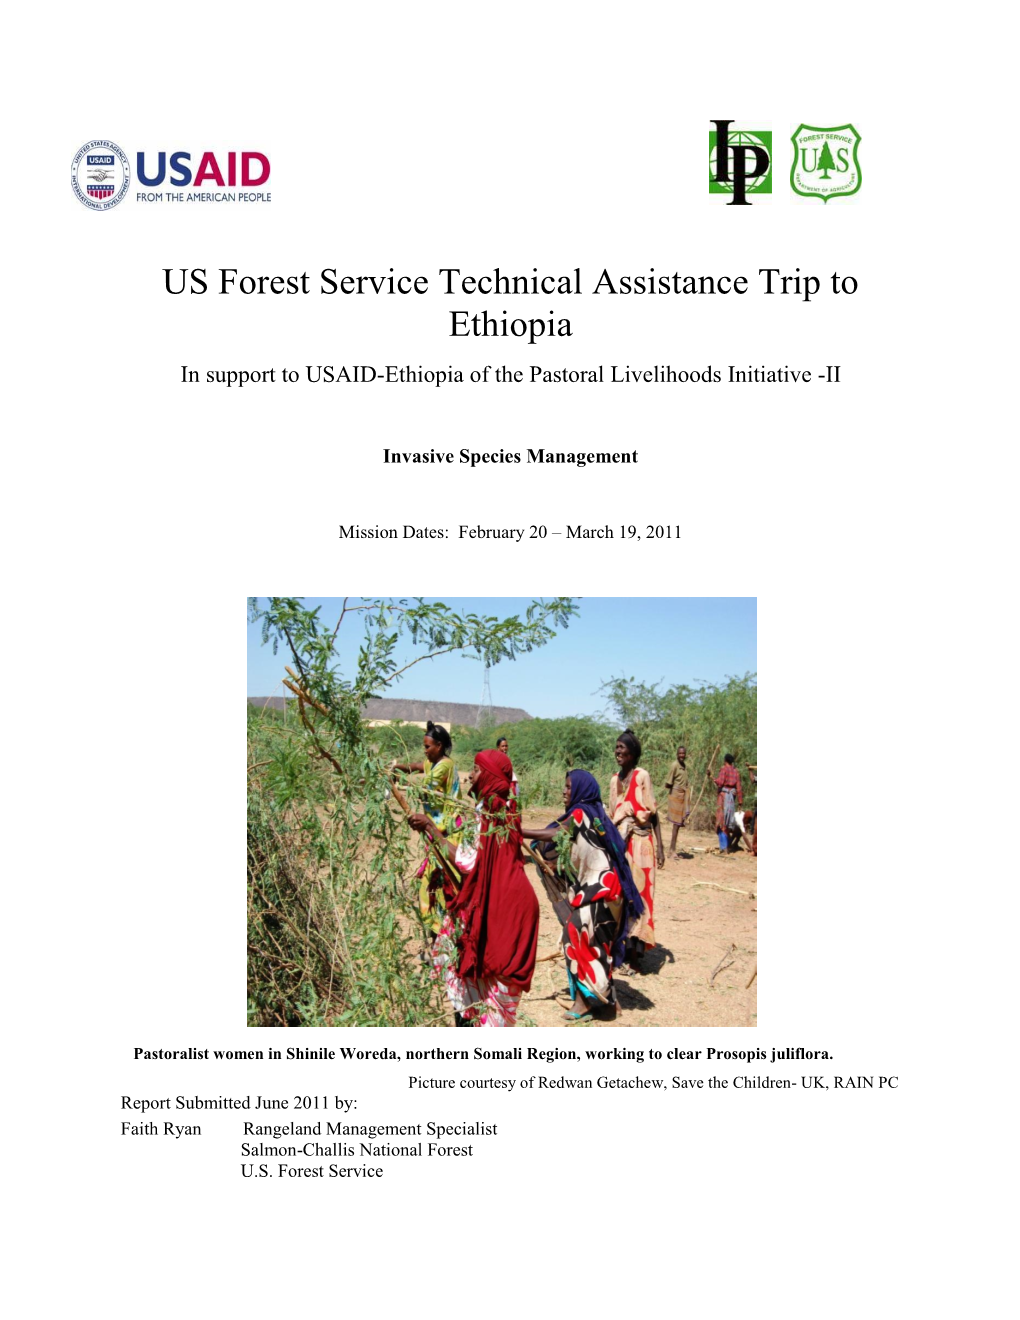 US Forest Service Technical Assistance Trip to Ethiopia in Support to USAID-Ethiopia of the Pastoral Livelihoods Initiative -II